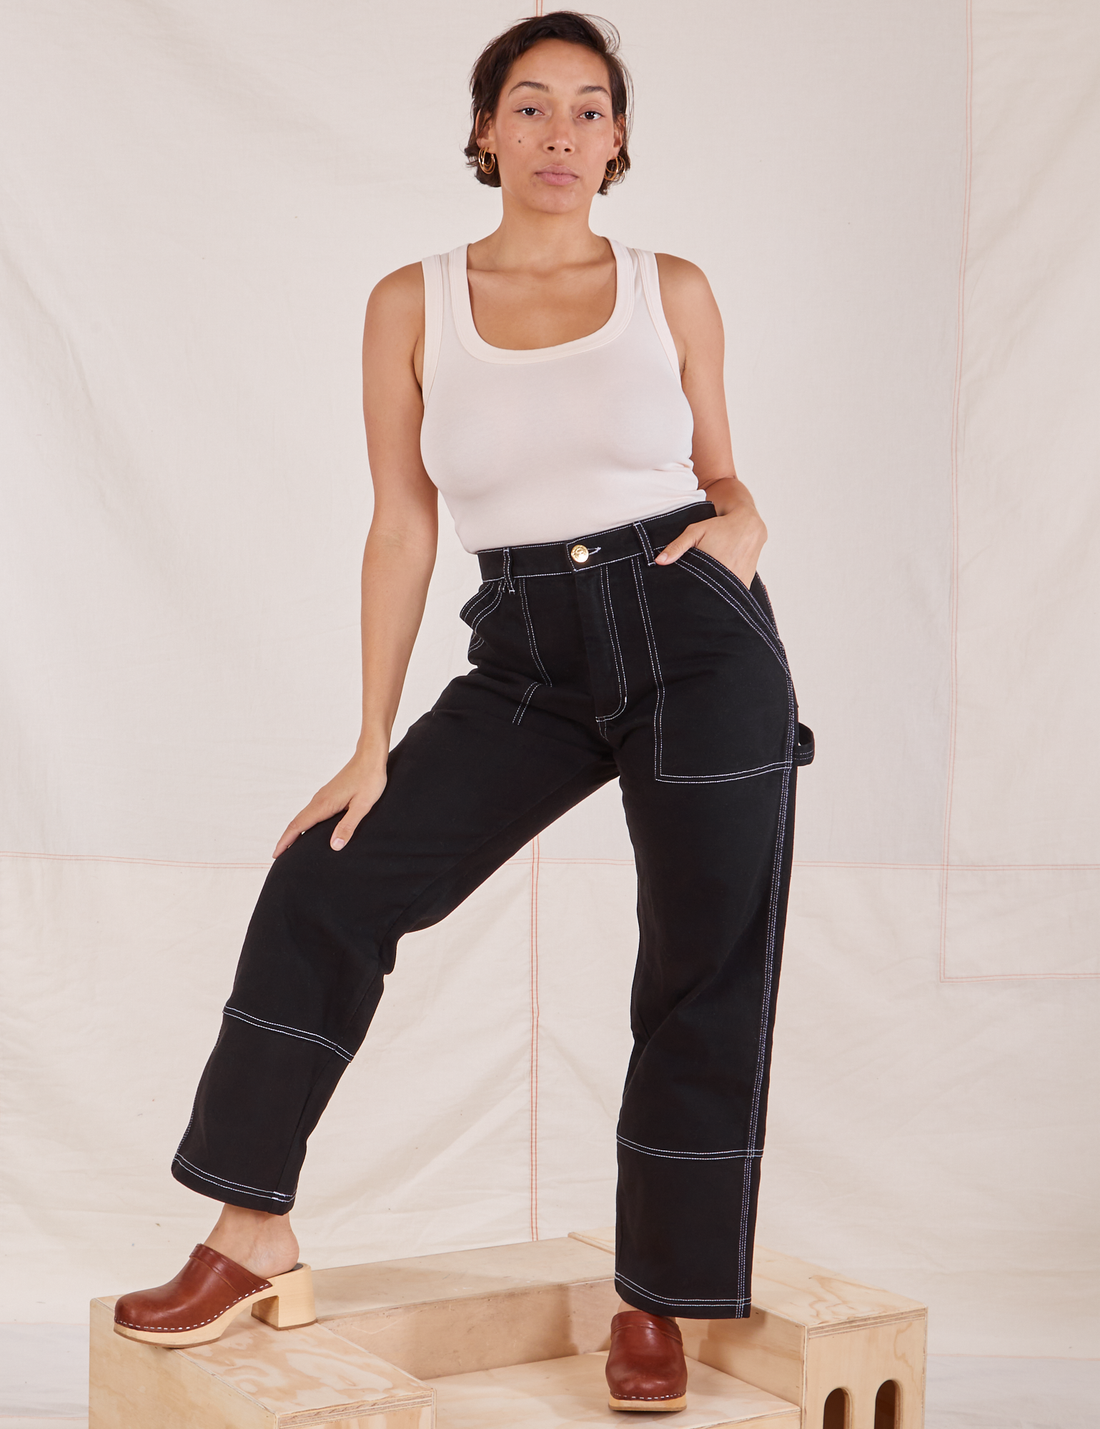 Tiara is 5'4" and wearing S Carpenter Jeans in Black paired with vintage off-white Tank Top